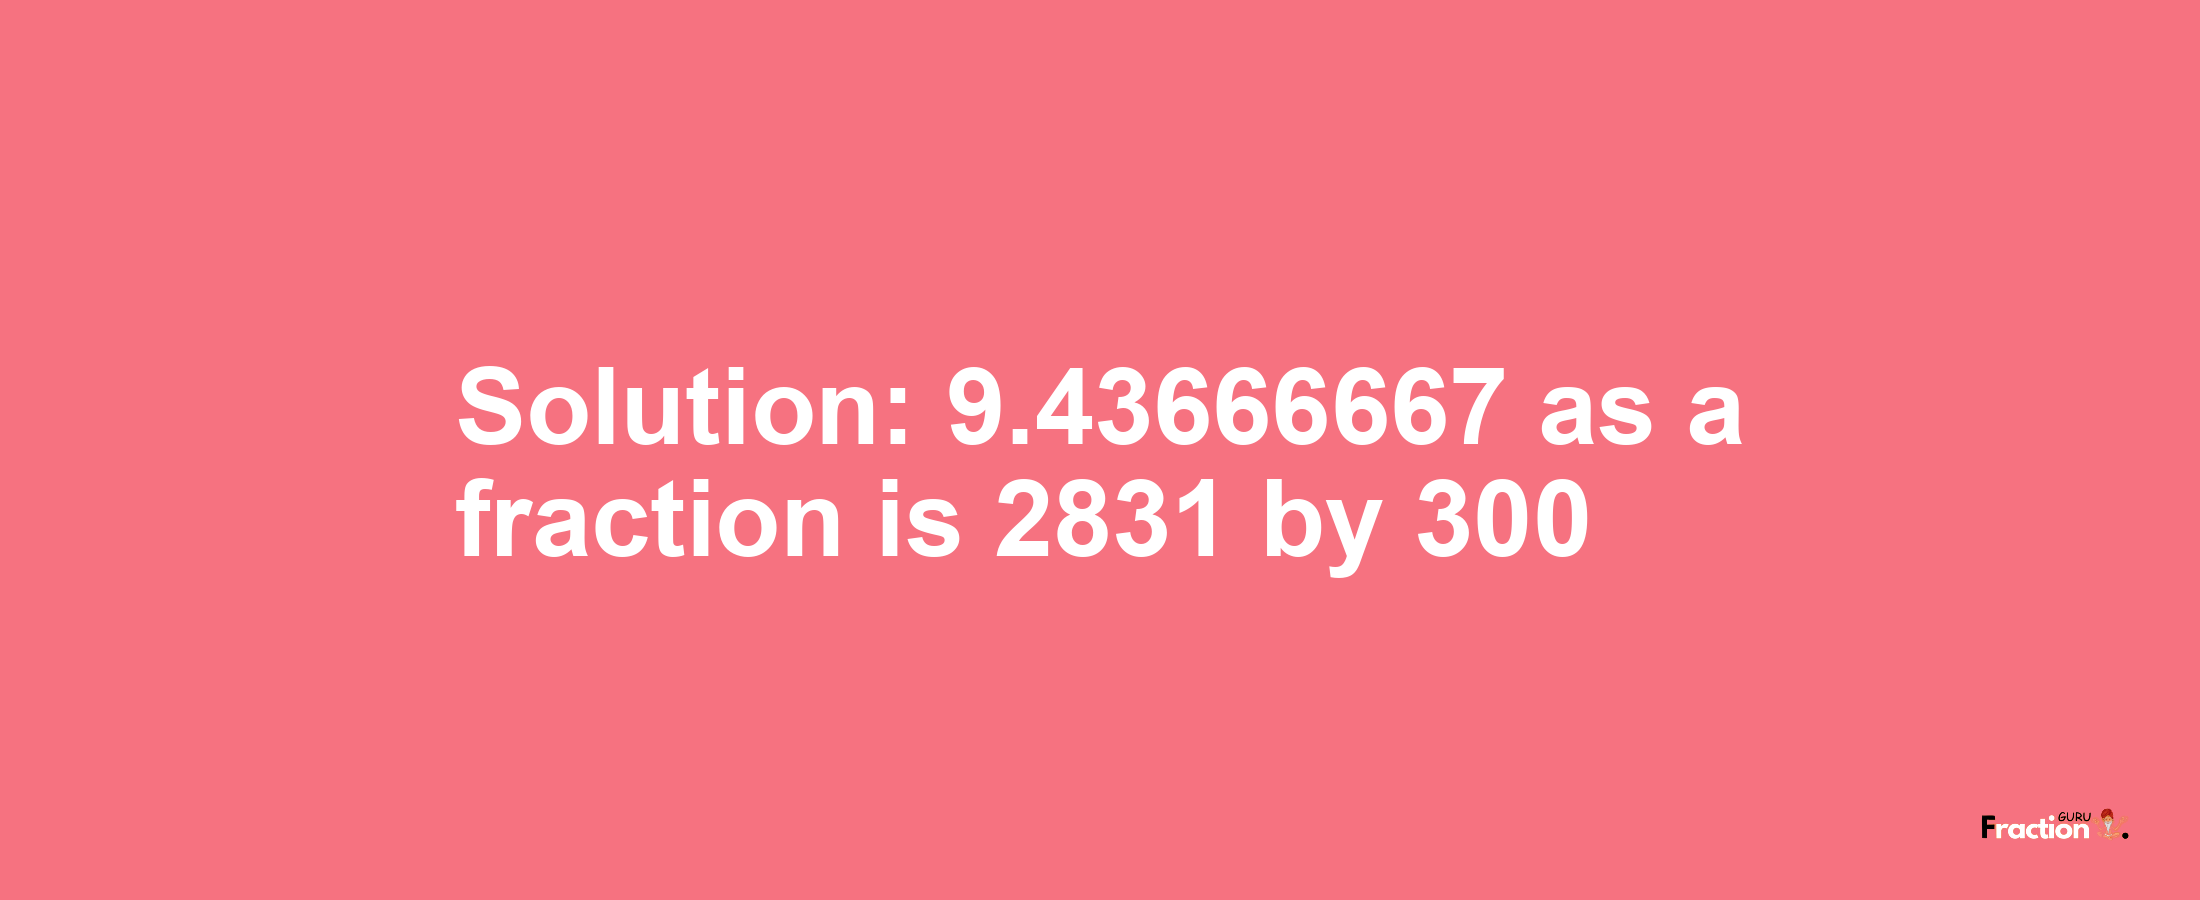 Solution:9.43666667 as a fraction is 2831/300